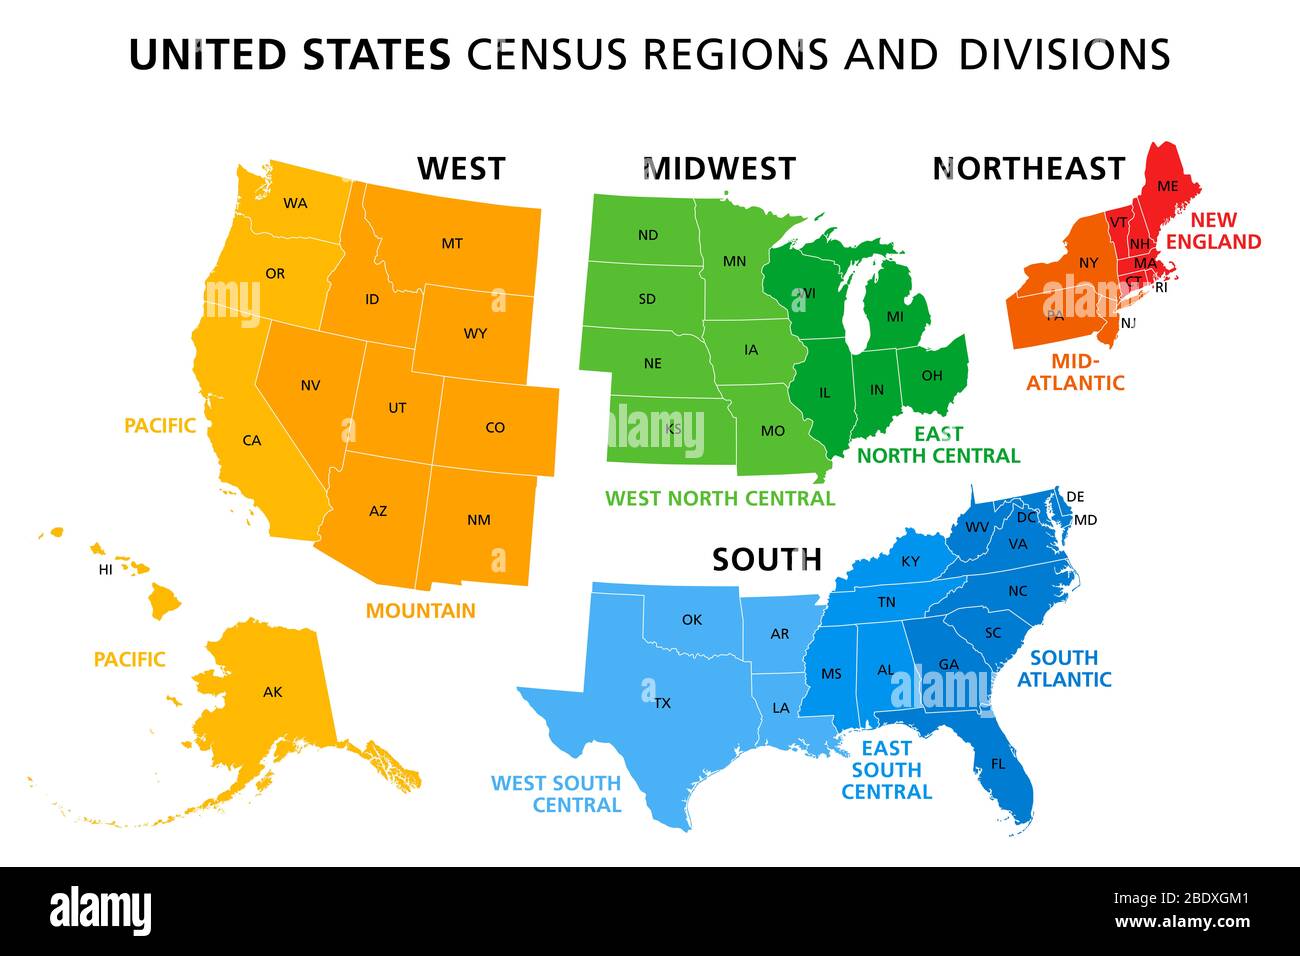 Map of United States split into Census regions and divisions. Region definition, widely used for data collection and analysis. Stock Photo